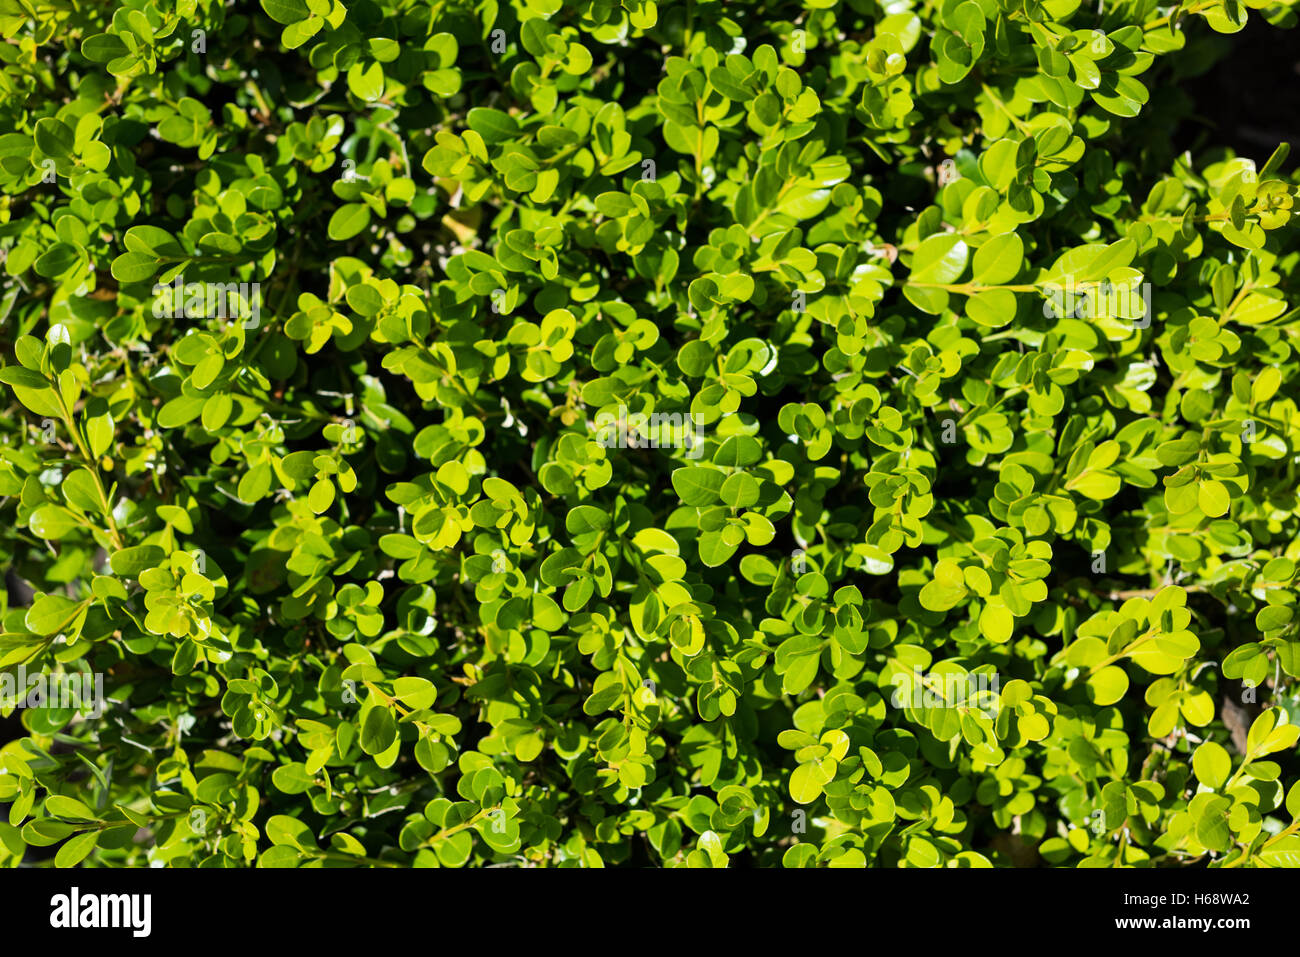 Close-up of green plants Stock Photo